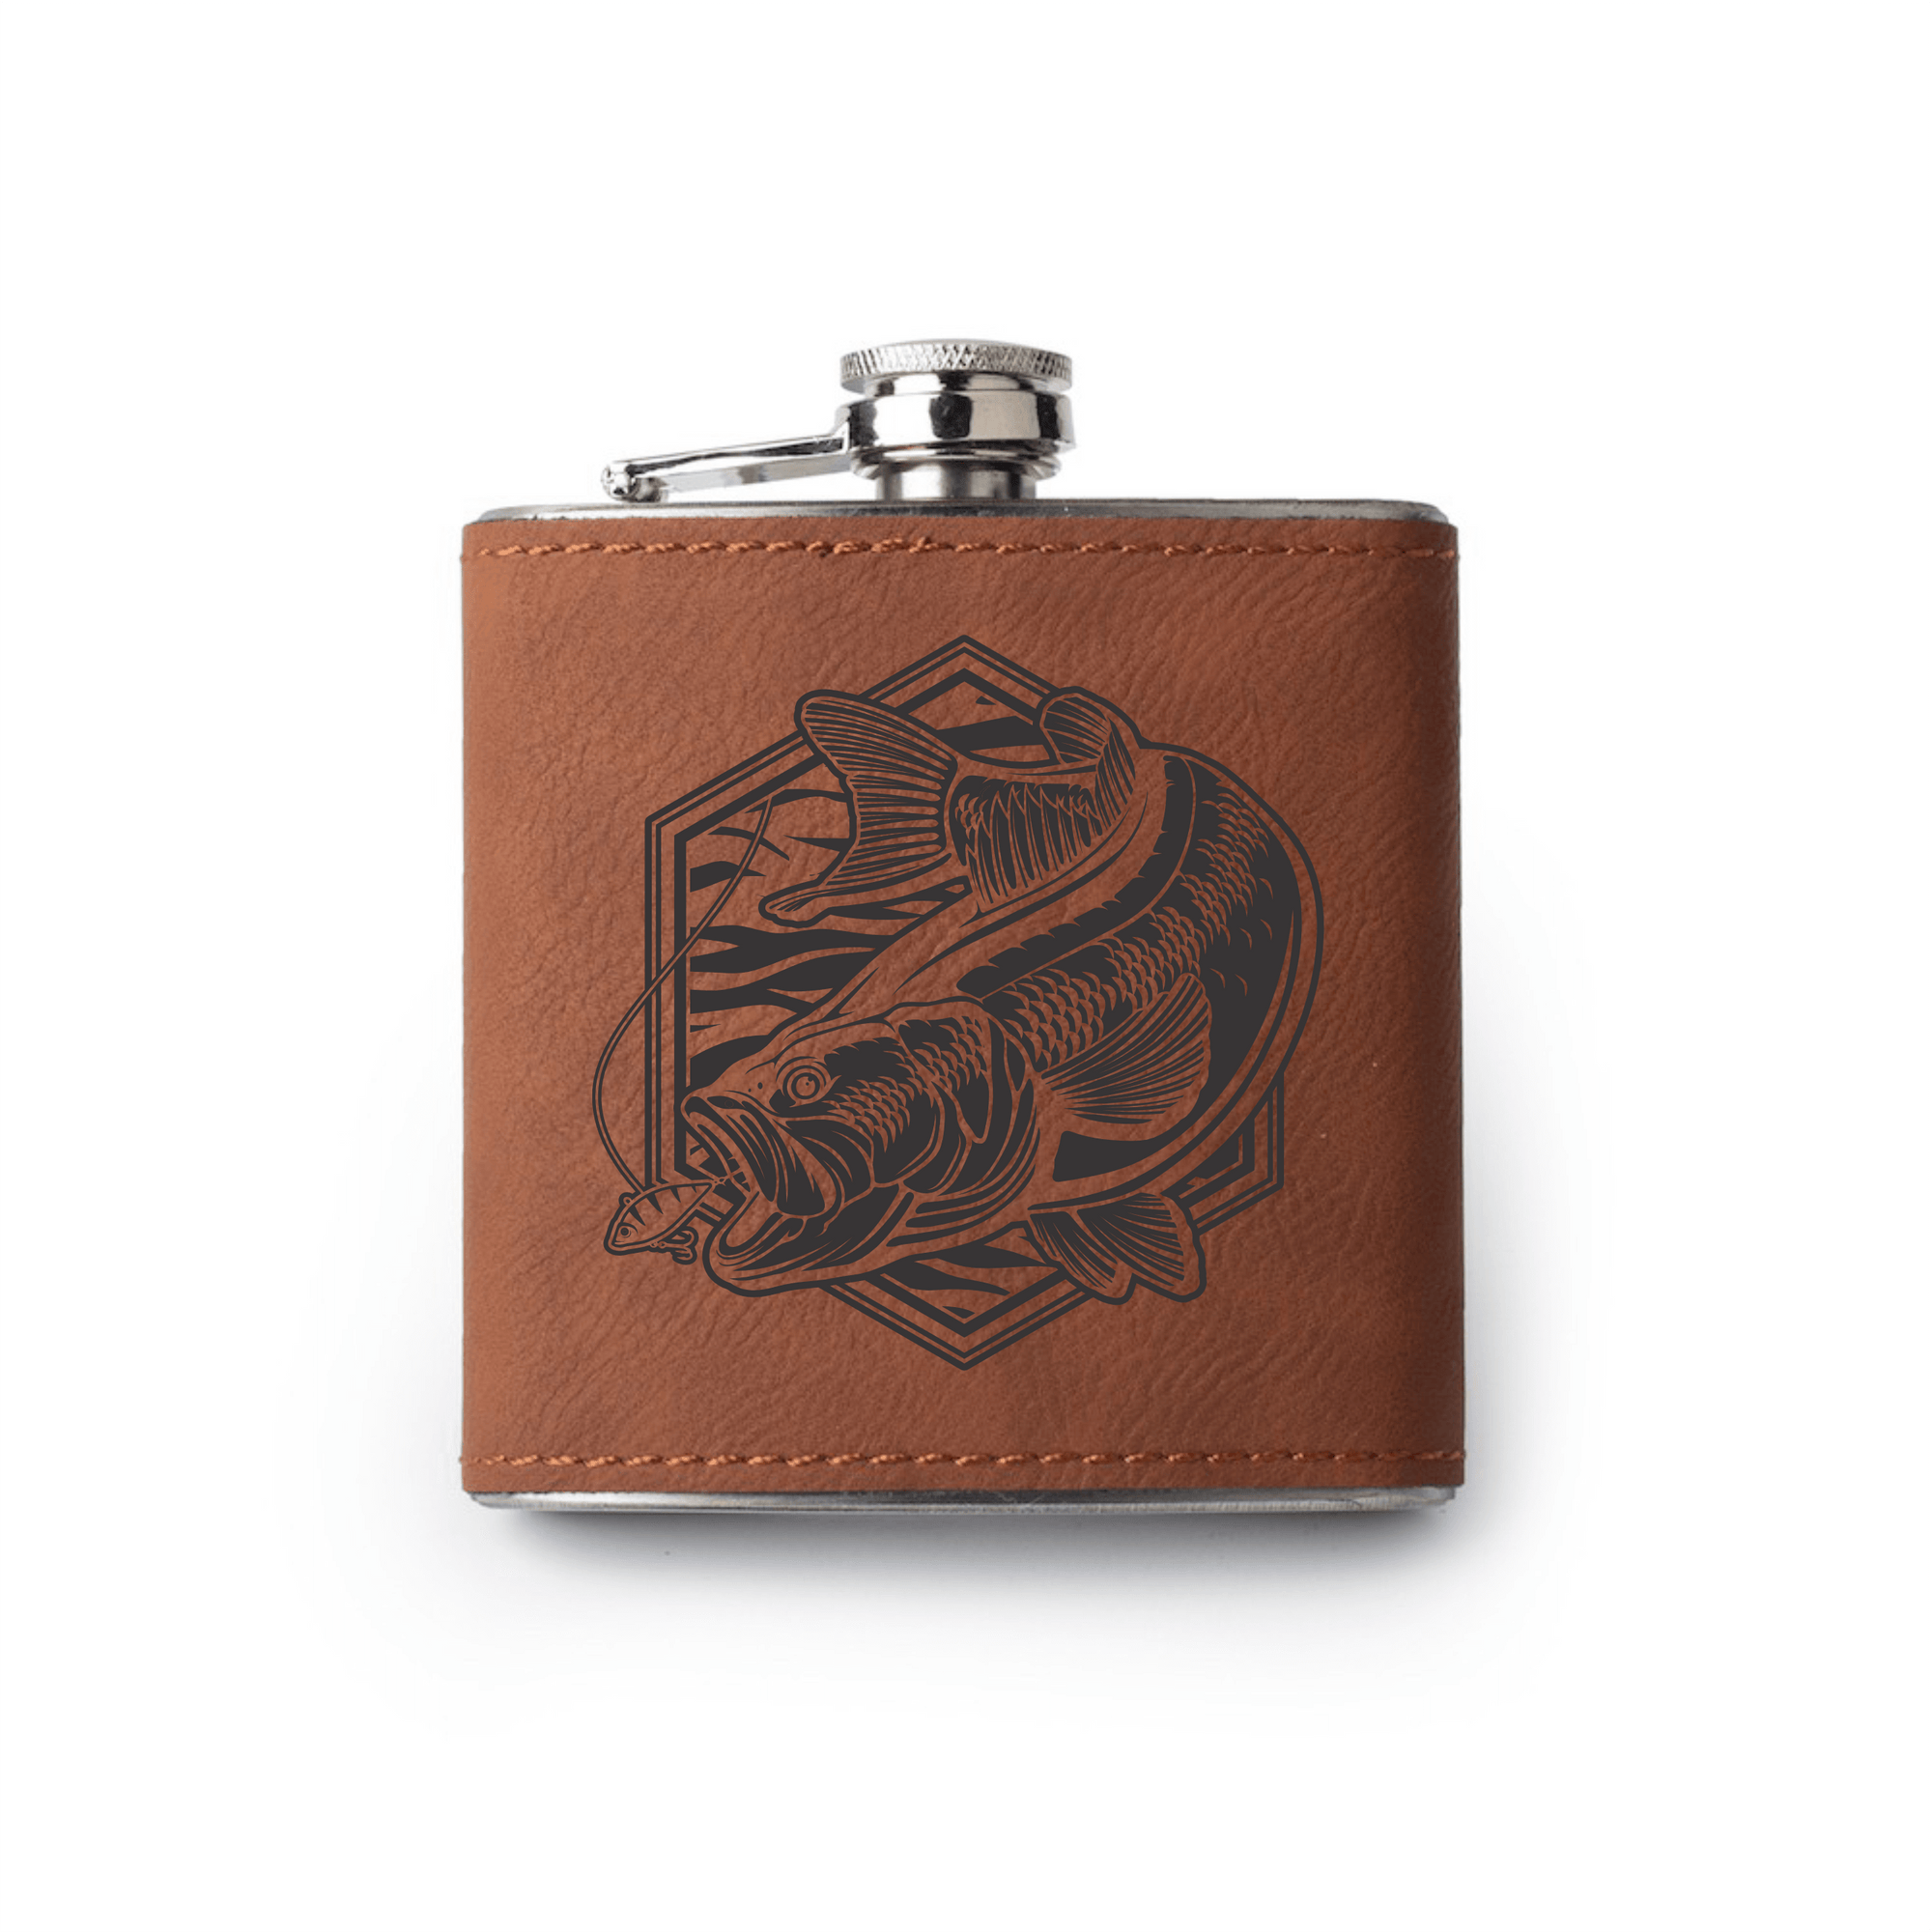 Bass Fishing Flask with bass artwork by Joel Jensen Art laser engraved - black on rawhide brown leather